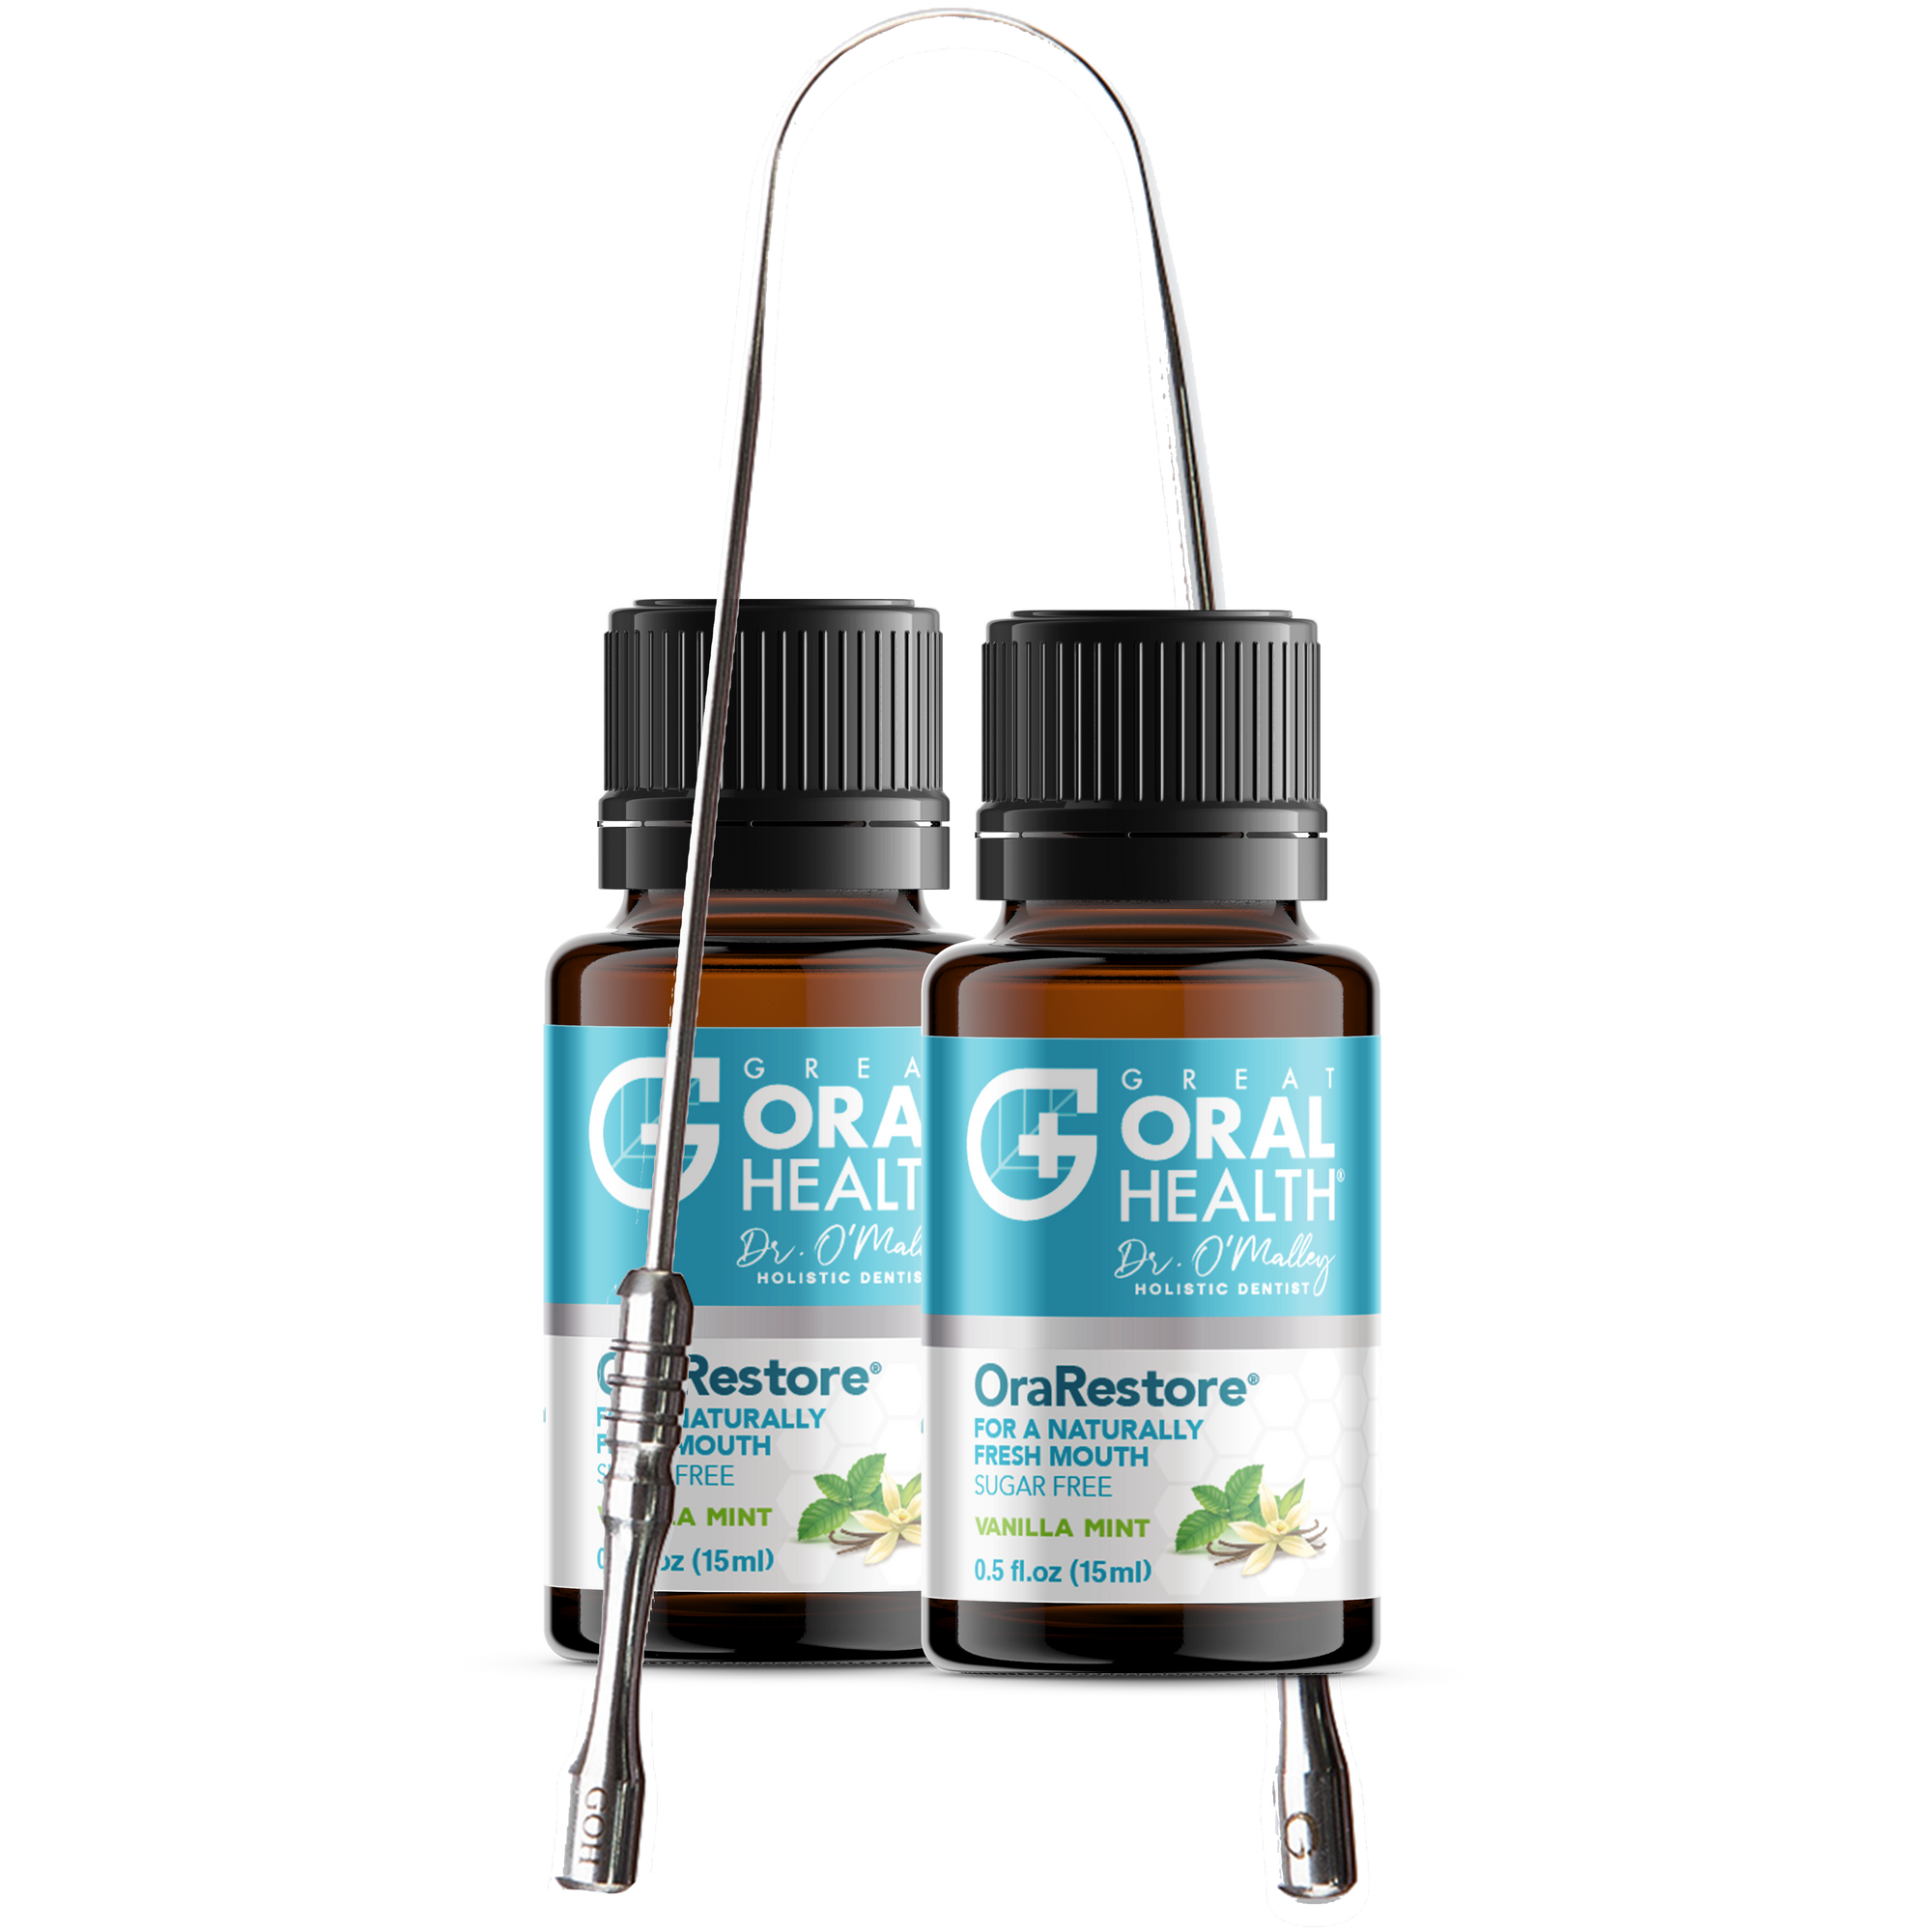 Get 2 of our Oral Care Essential Oil Bottles & Get a Free Tongue Scraper